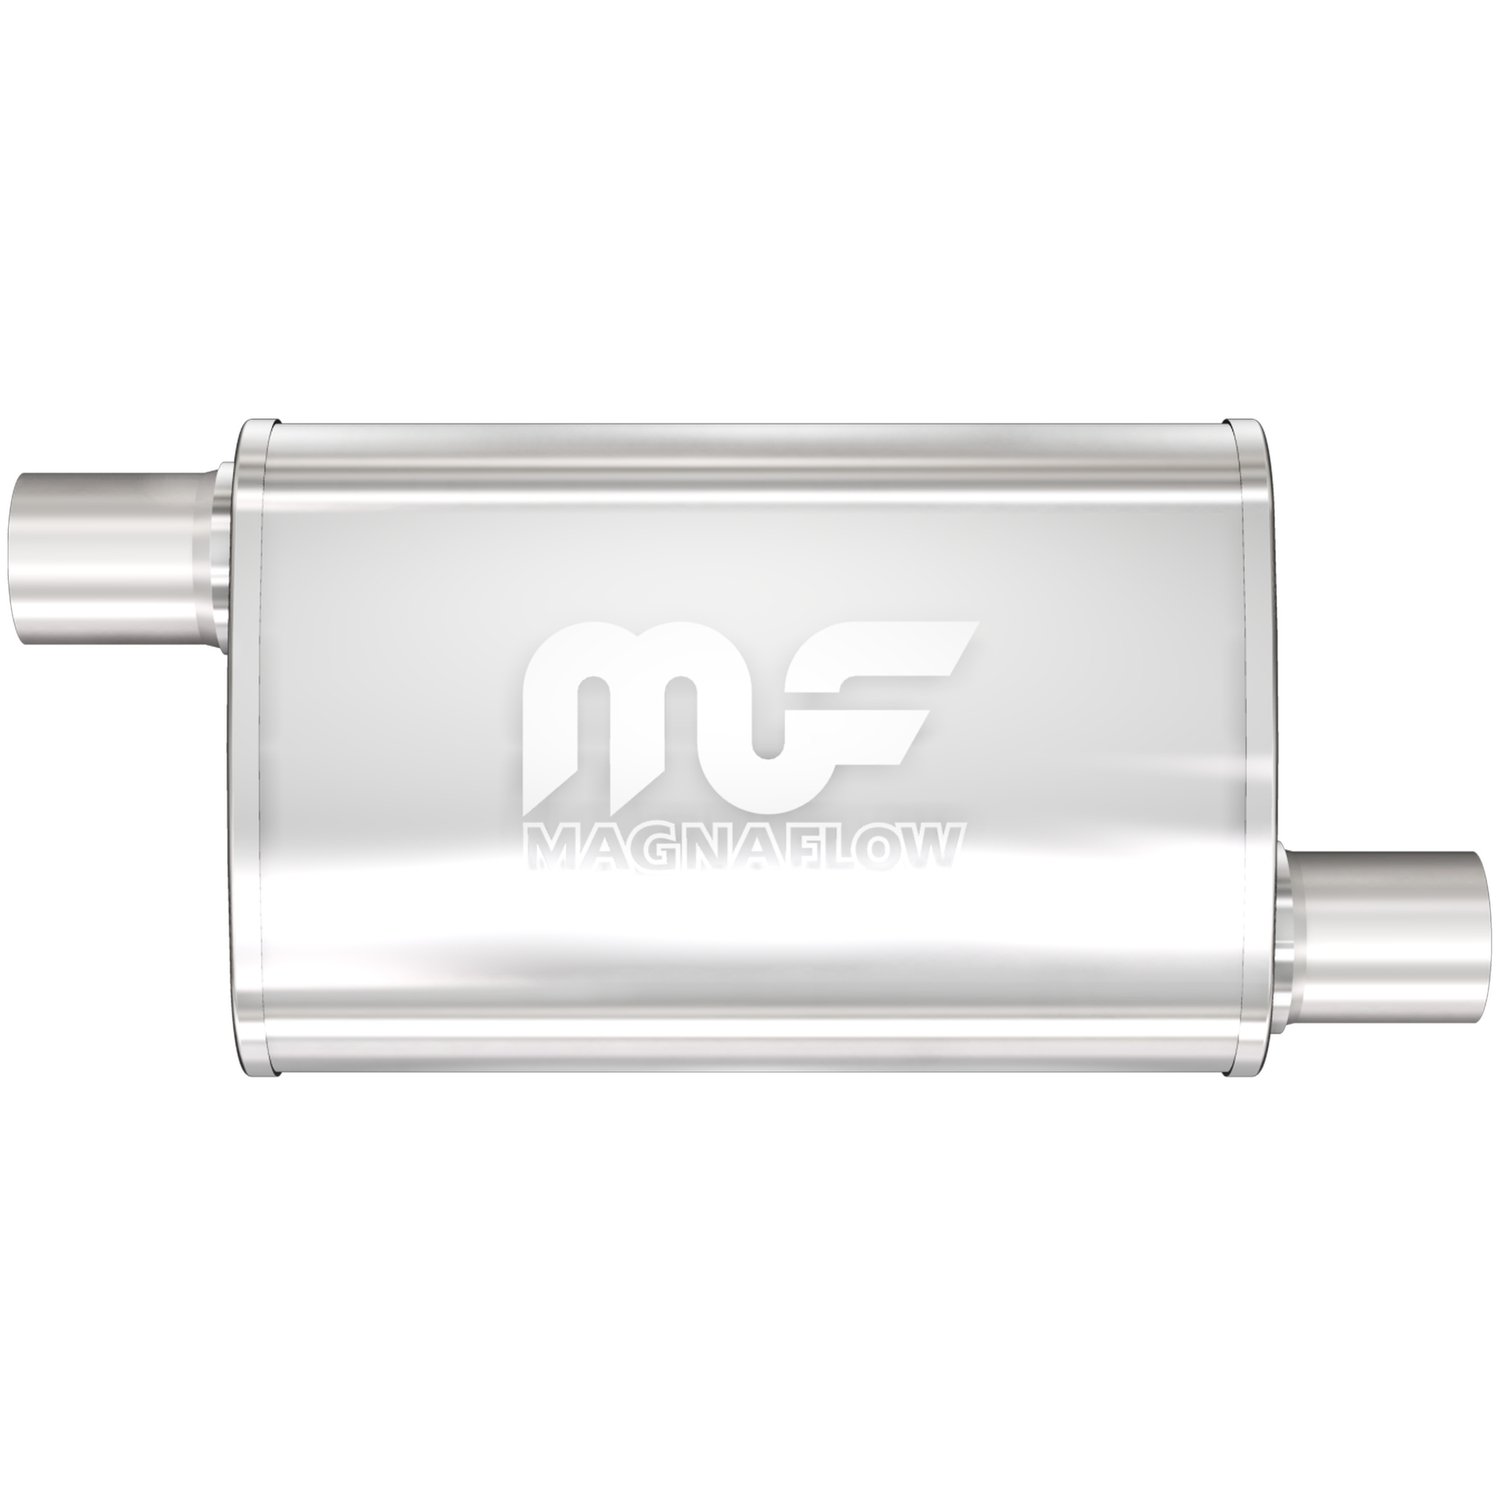 4 x 9" Oval Muffler Offset In/Offset Out: 2"/2" Body Lenght: 14" Overall Lenght: 20" Core Size: 2.5" Satin Finish